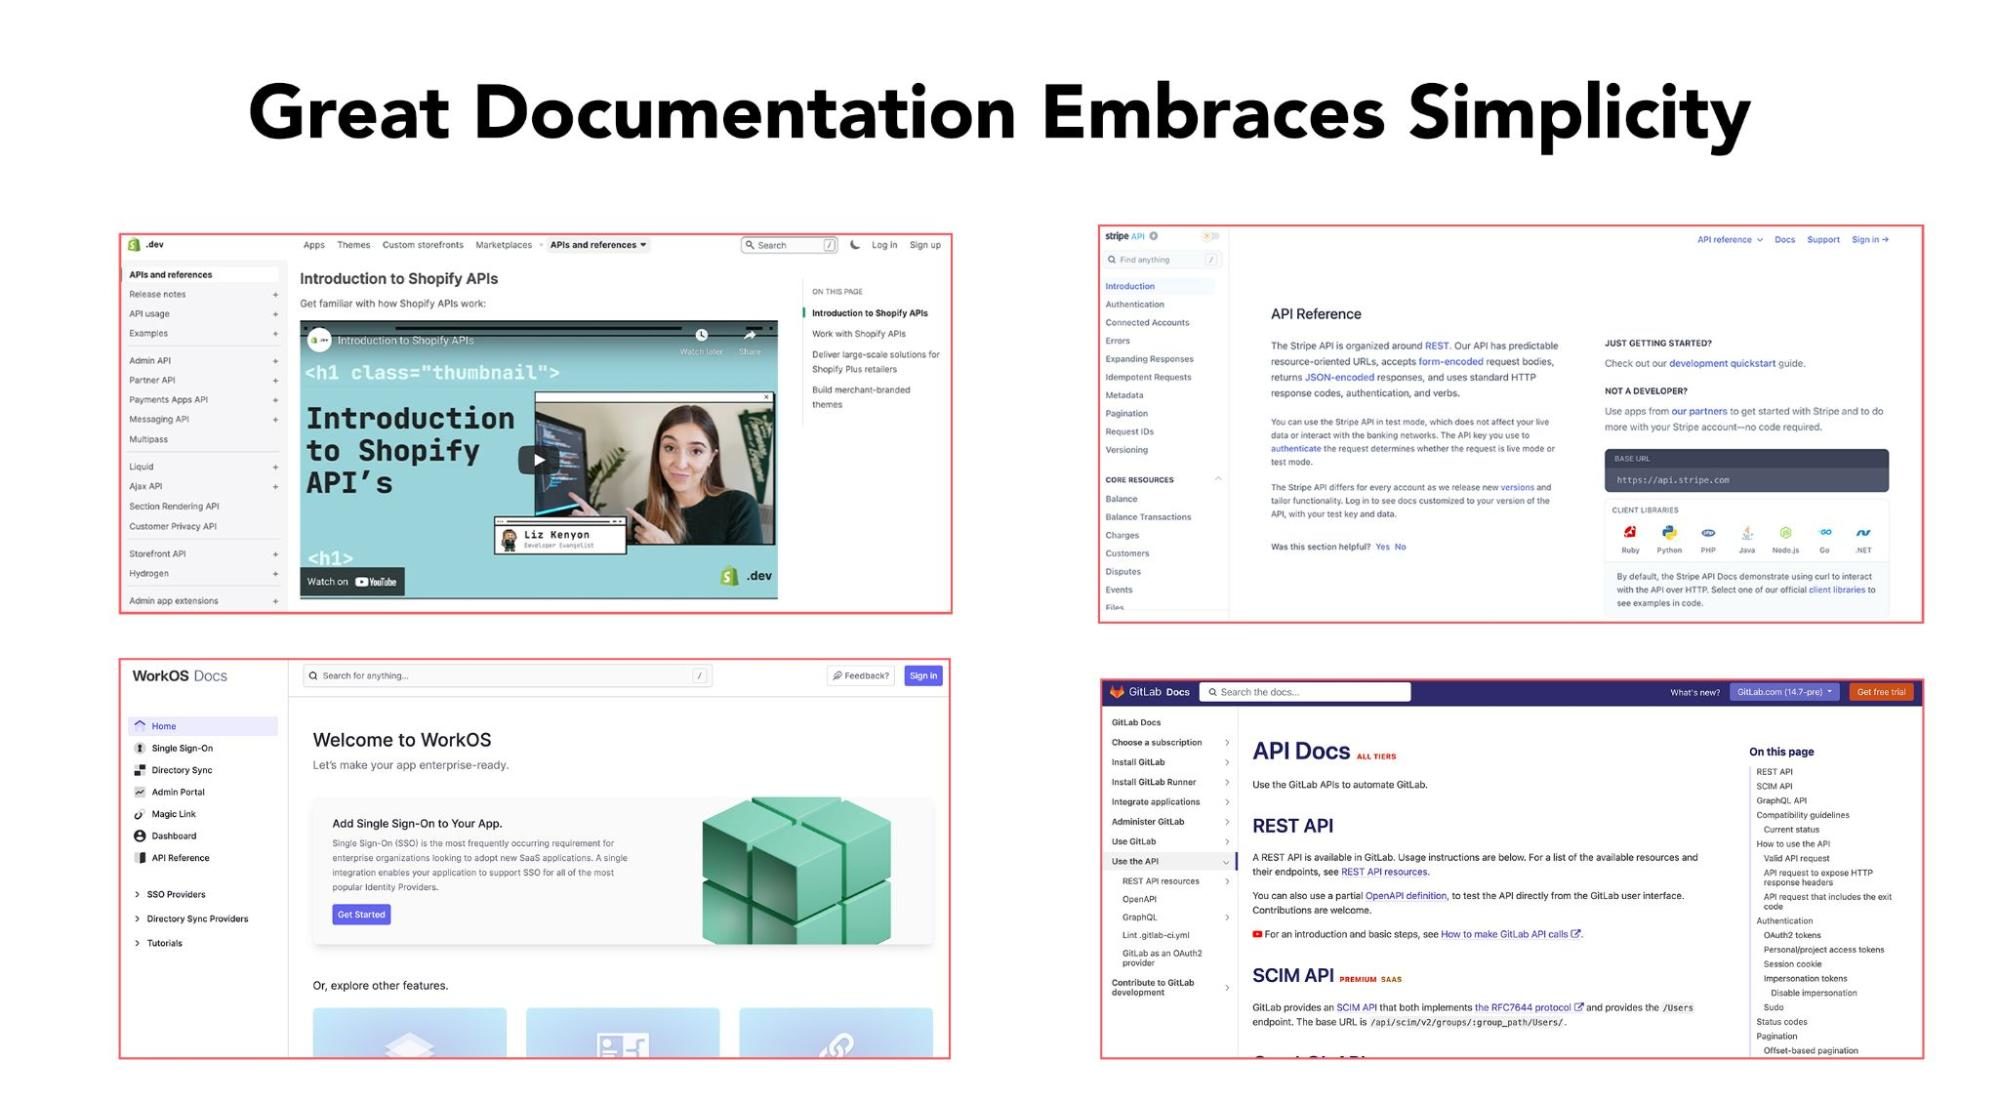 examples of great documentation that embraces simplicity (Shopify, Stripe, WorkOS, GitLab)